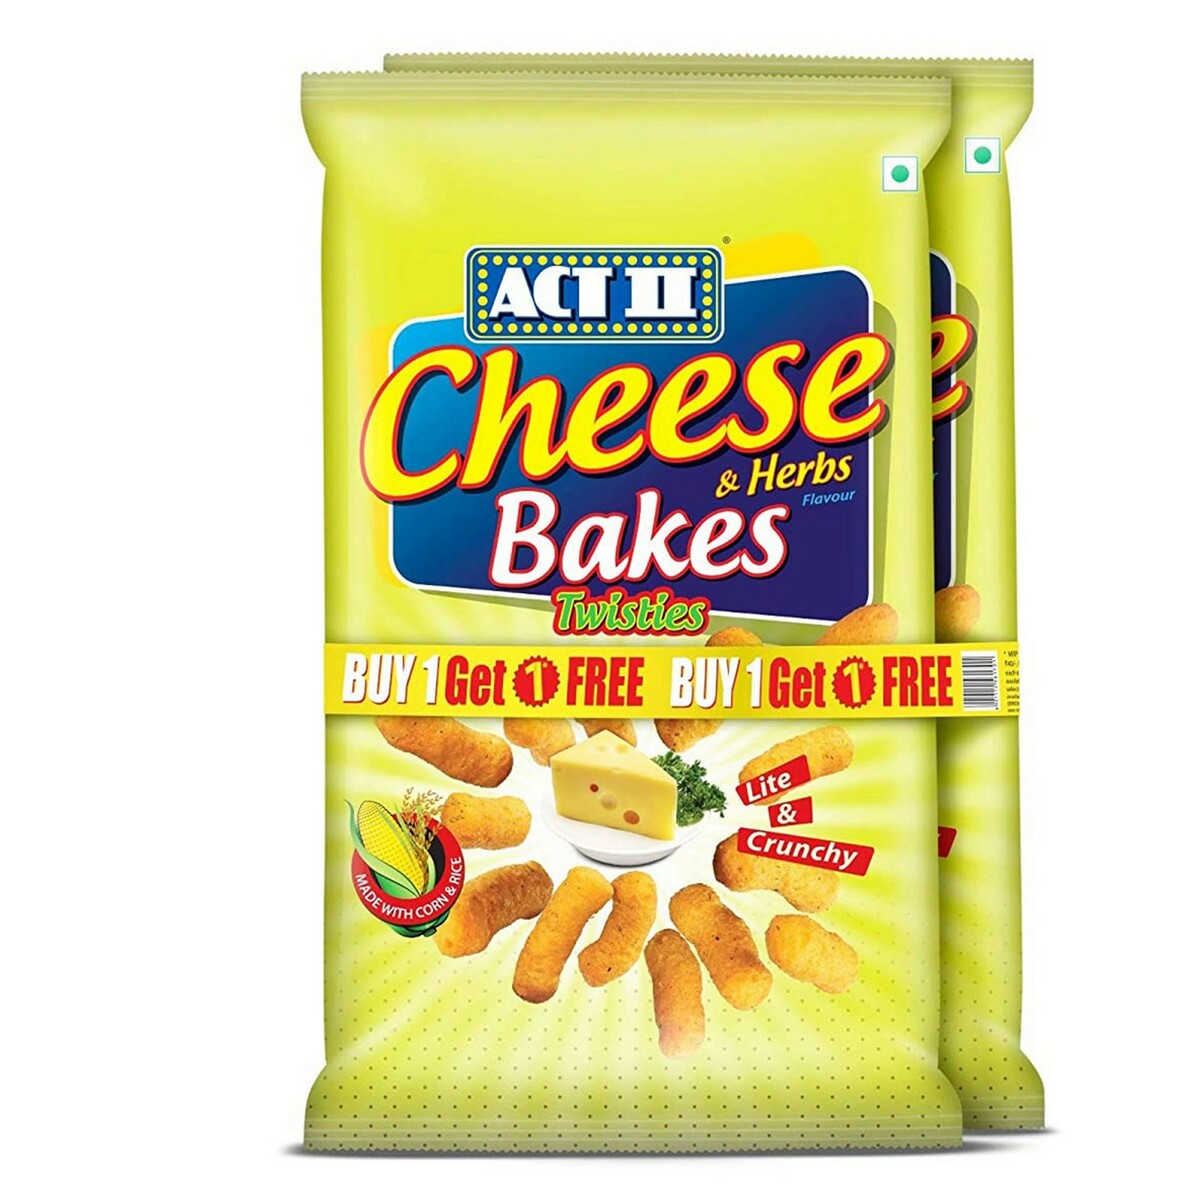 ACTII Cheese & Herbs Bakes 55gm 1+1 Free